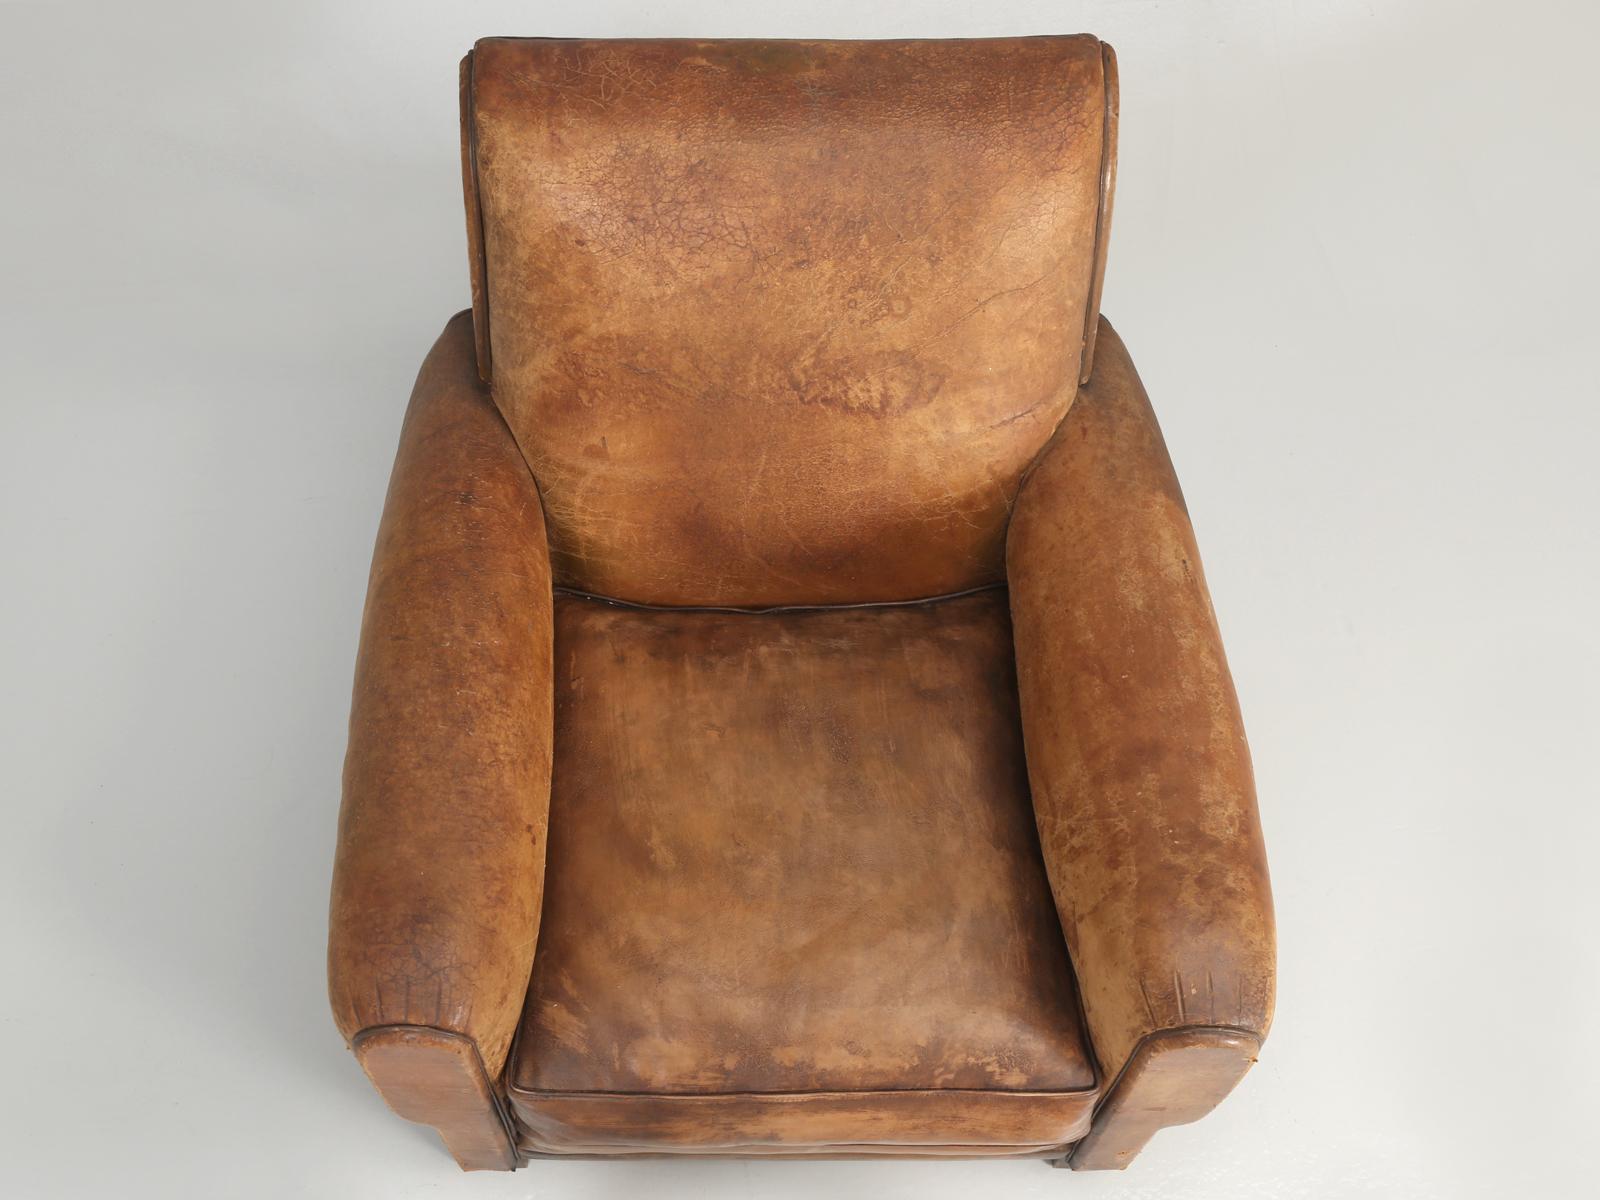 Mid-20th Century French Art Deco Club Chair Carefully Restored to Look Like it Wasn't Touched